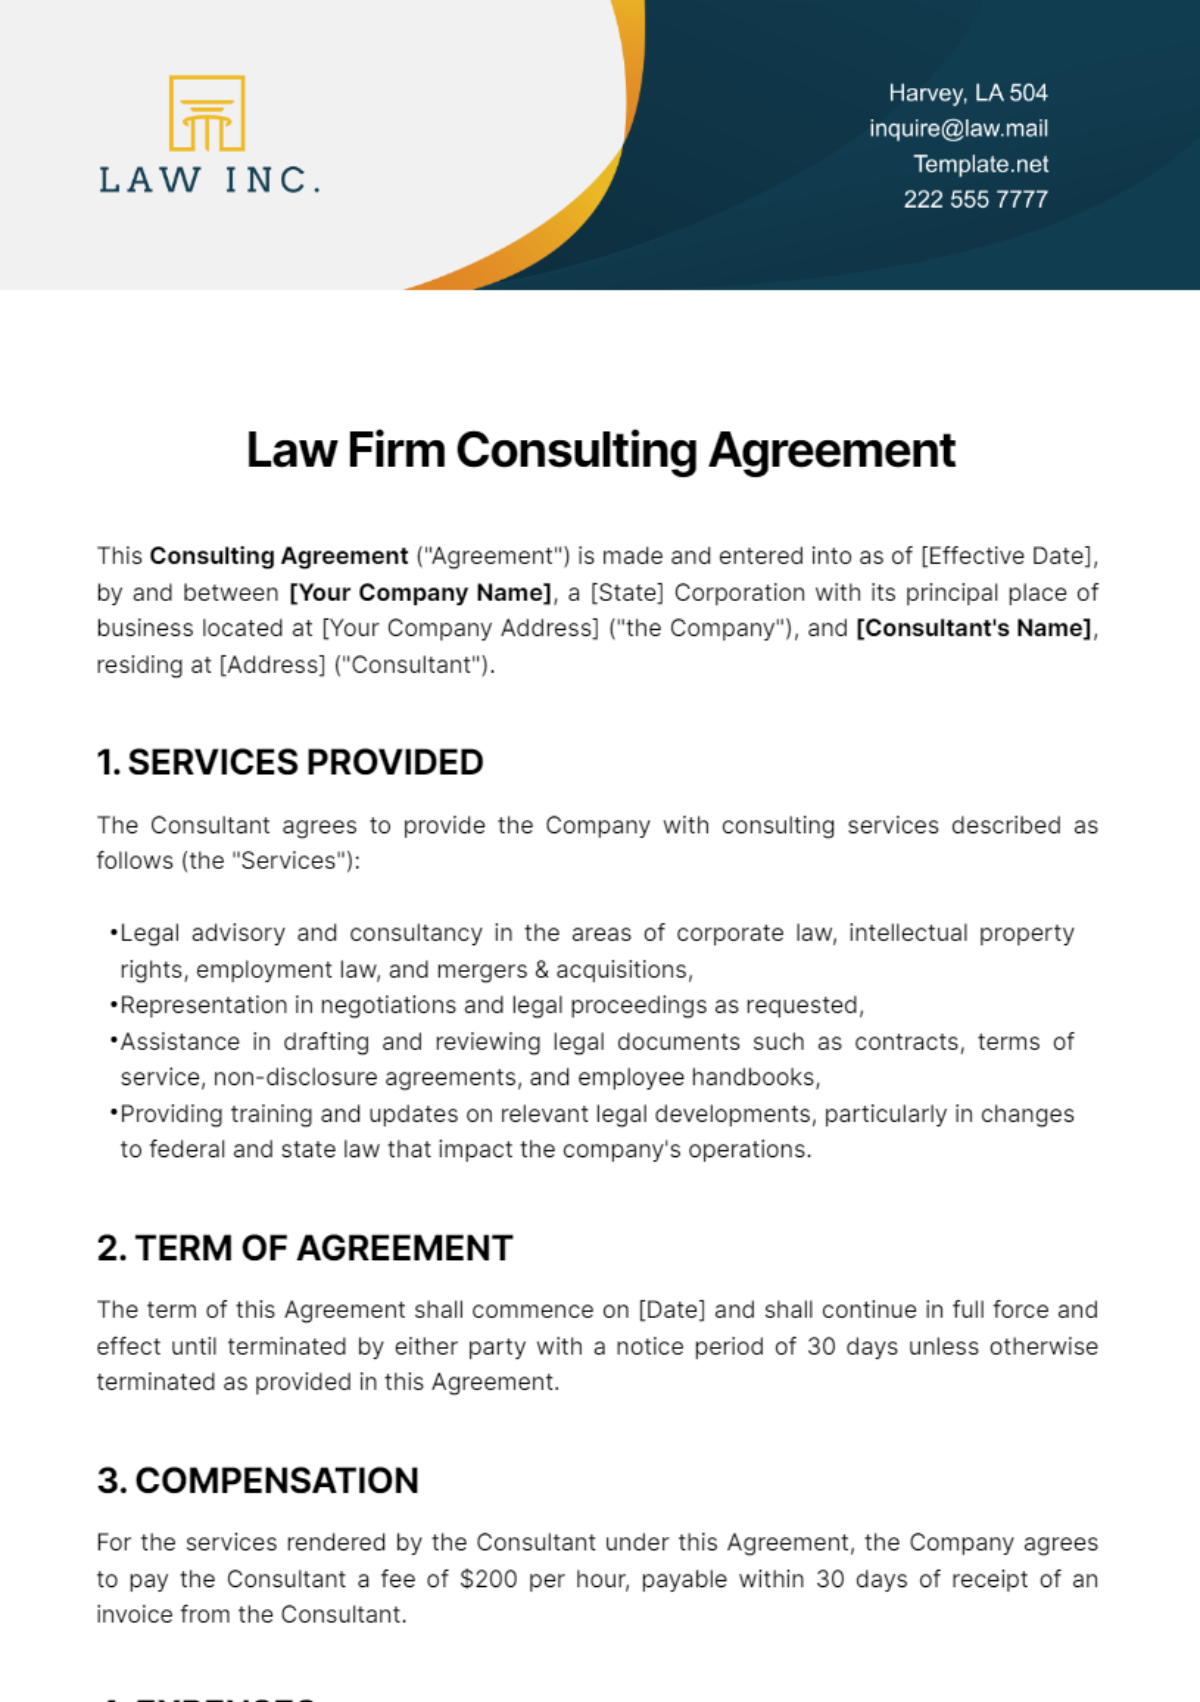 Free Law Firm Consulting Agreement Template